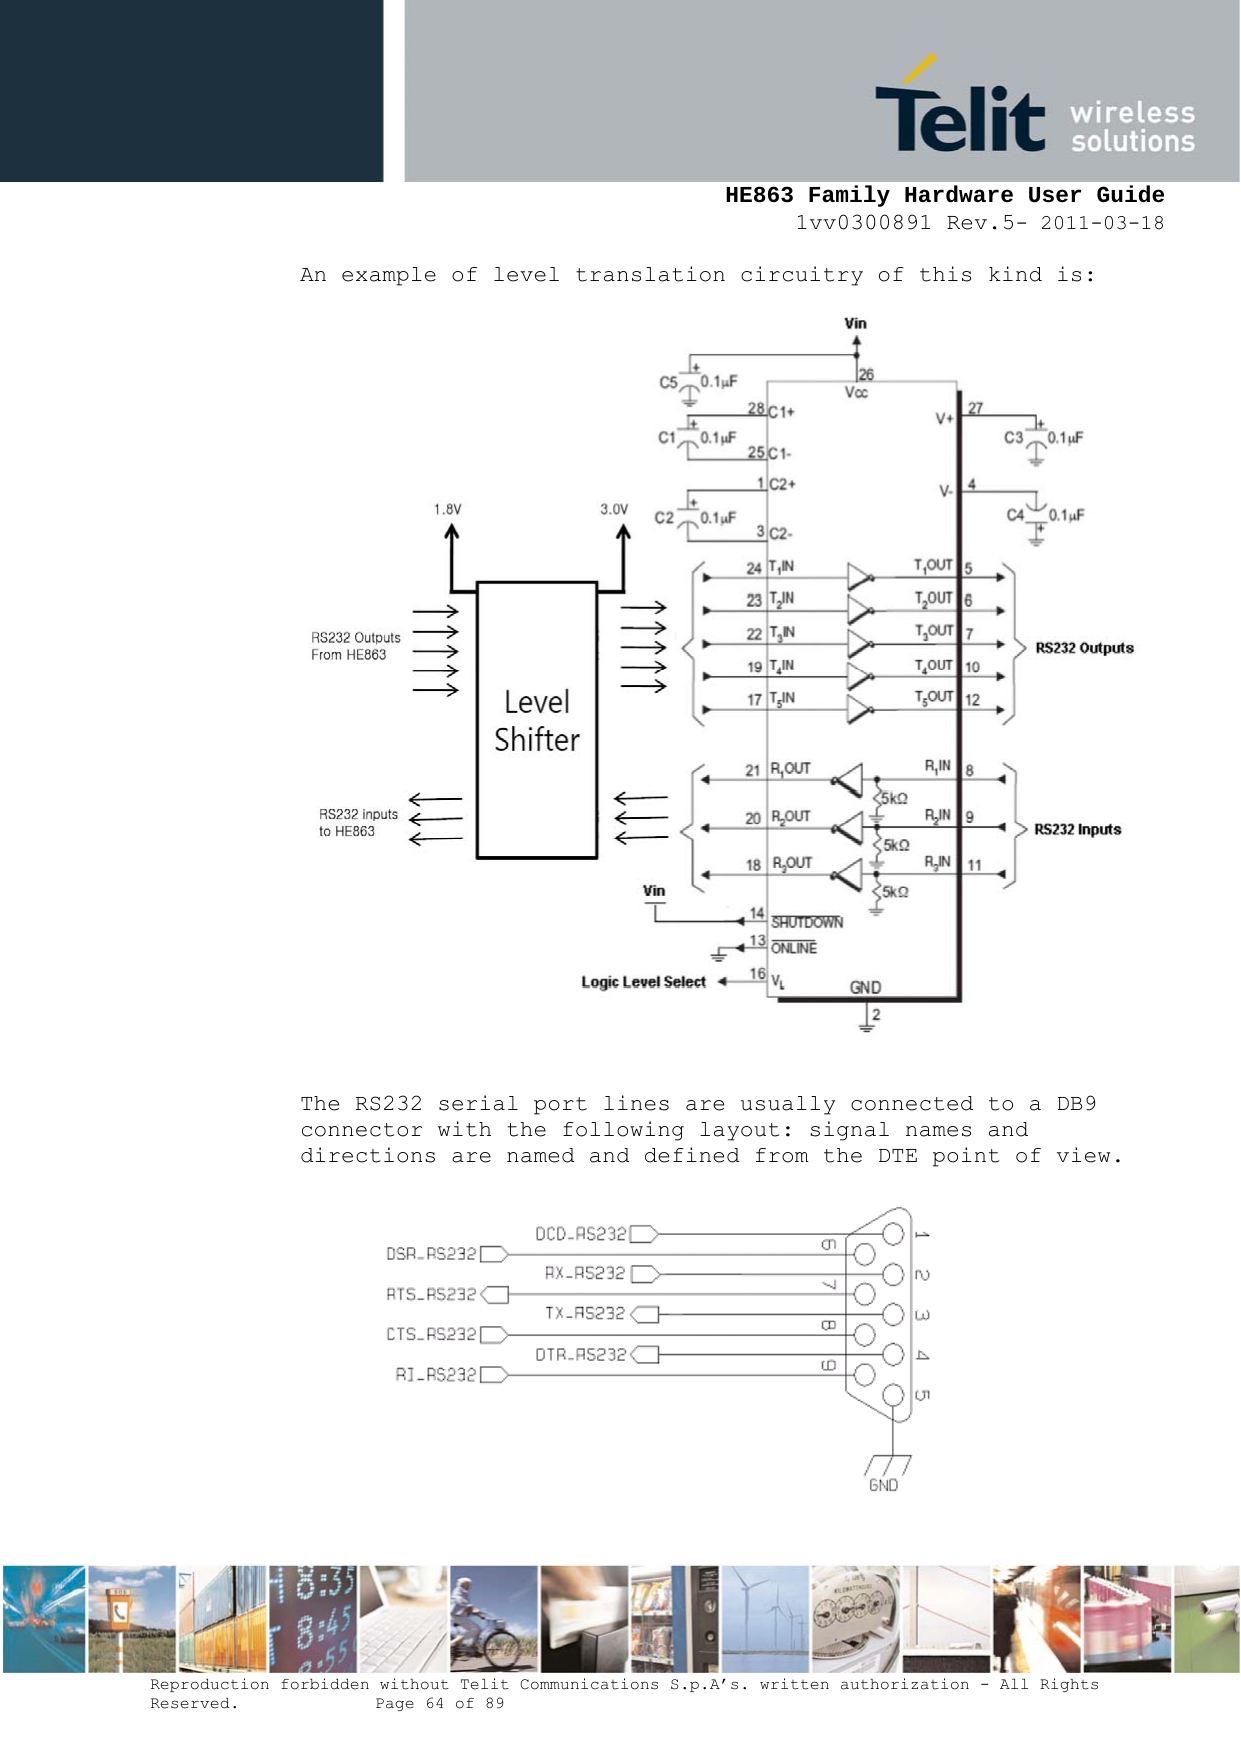     HE863 Family Hardware User Guide 1vv0300891 Rev.5- 2011-03-18    Reproduction forbidden without Telit Communications S.p.A’s. written authorization - All Rights Reserved.    Page 64 of 89  An example of level translation circuitry of this kind is:   The RS232 serial port lines are usually connected to a DB9 connector with the following layout: signal names and directions are named and defined from the DTE point of view.  